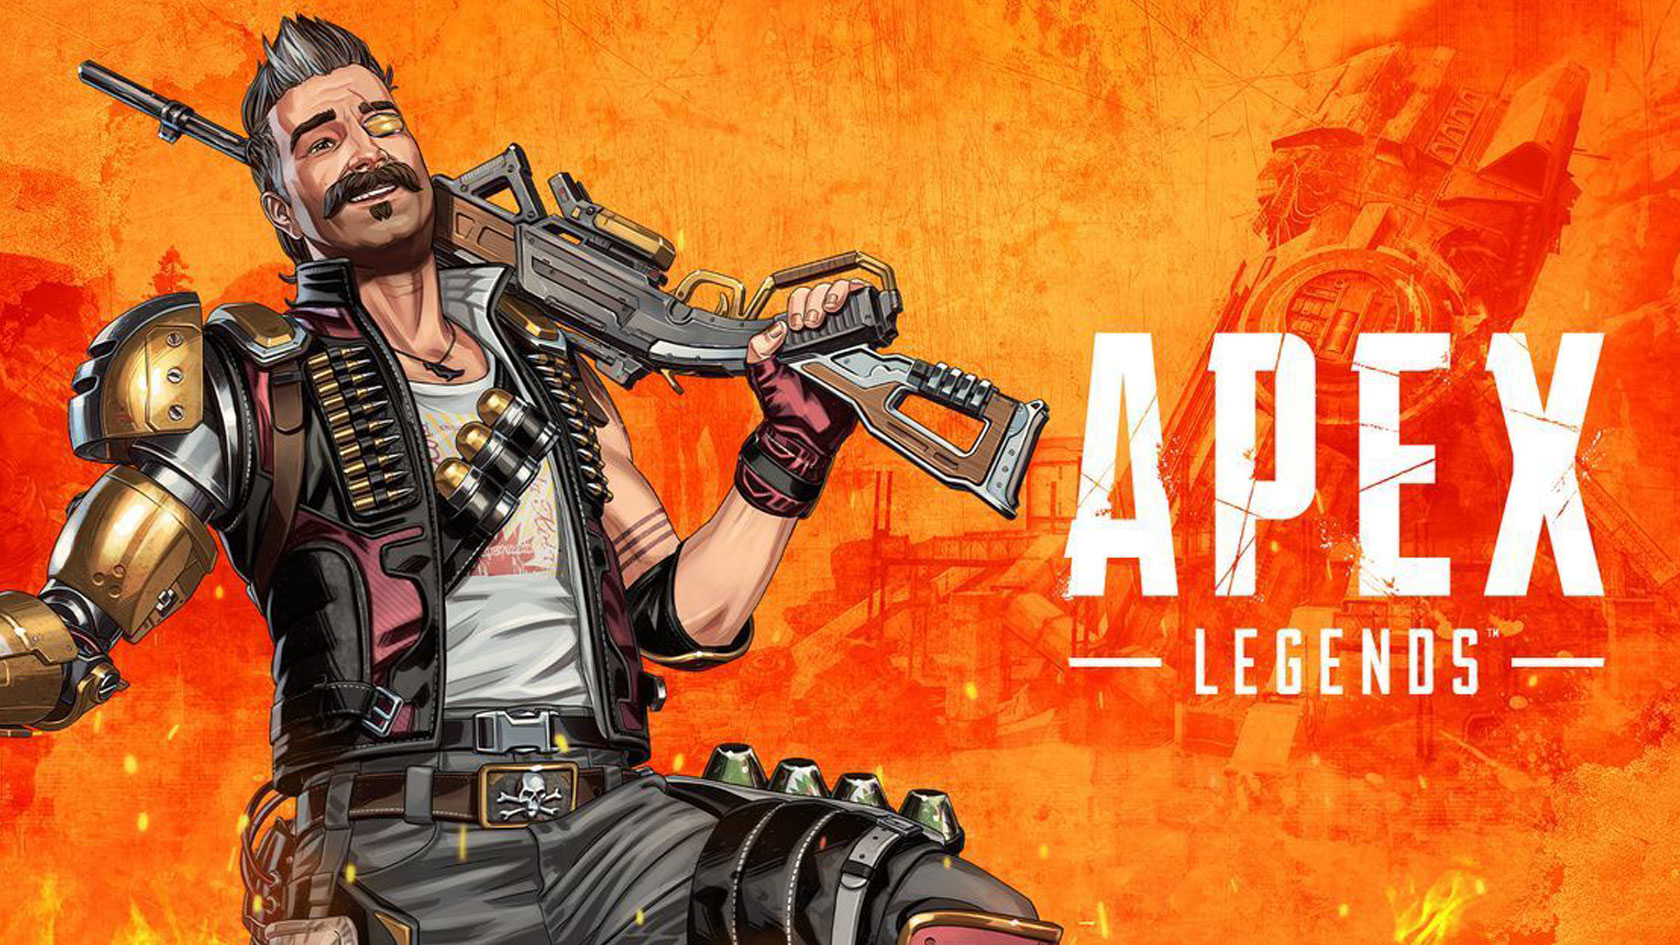 When Did Apex Legends Come Out?